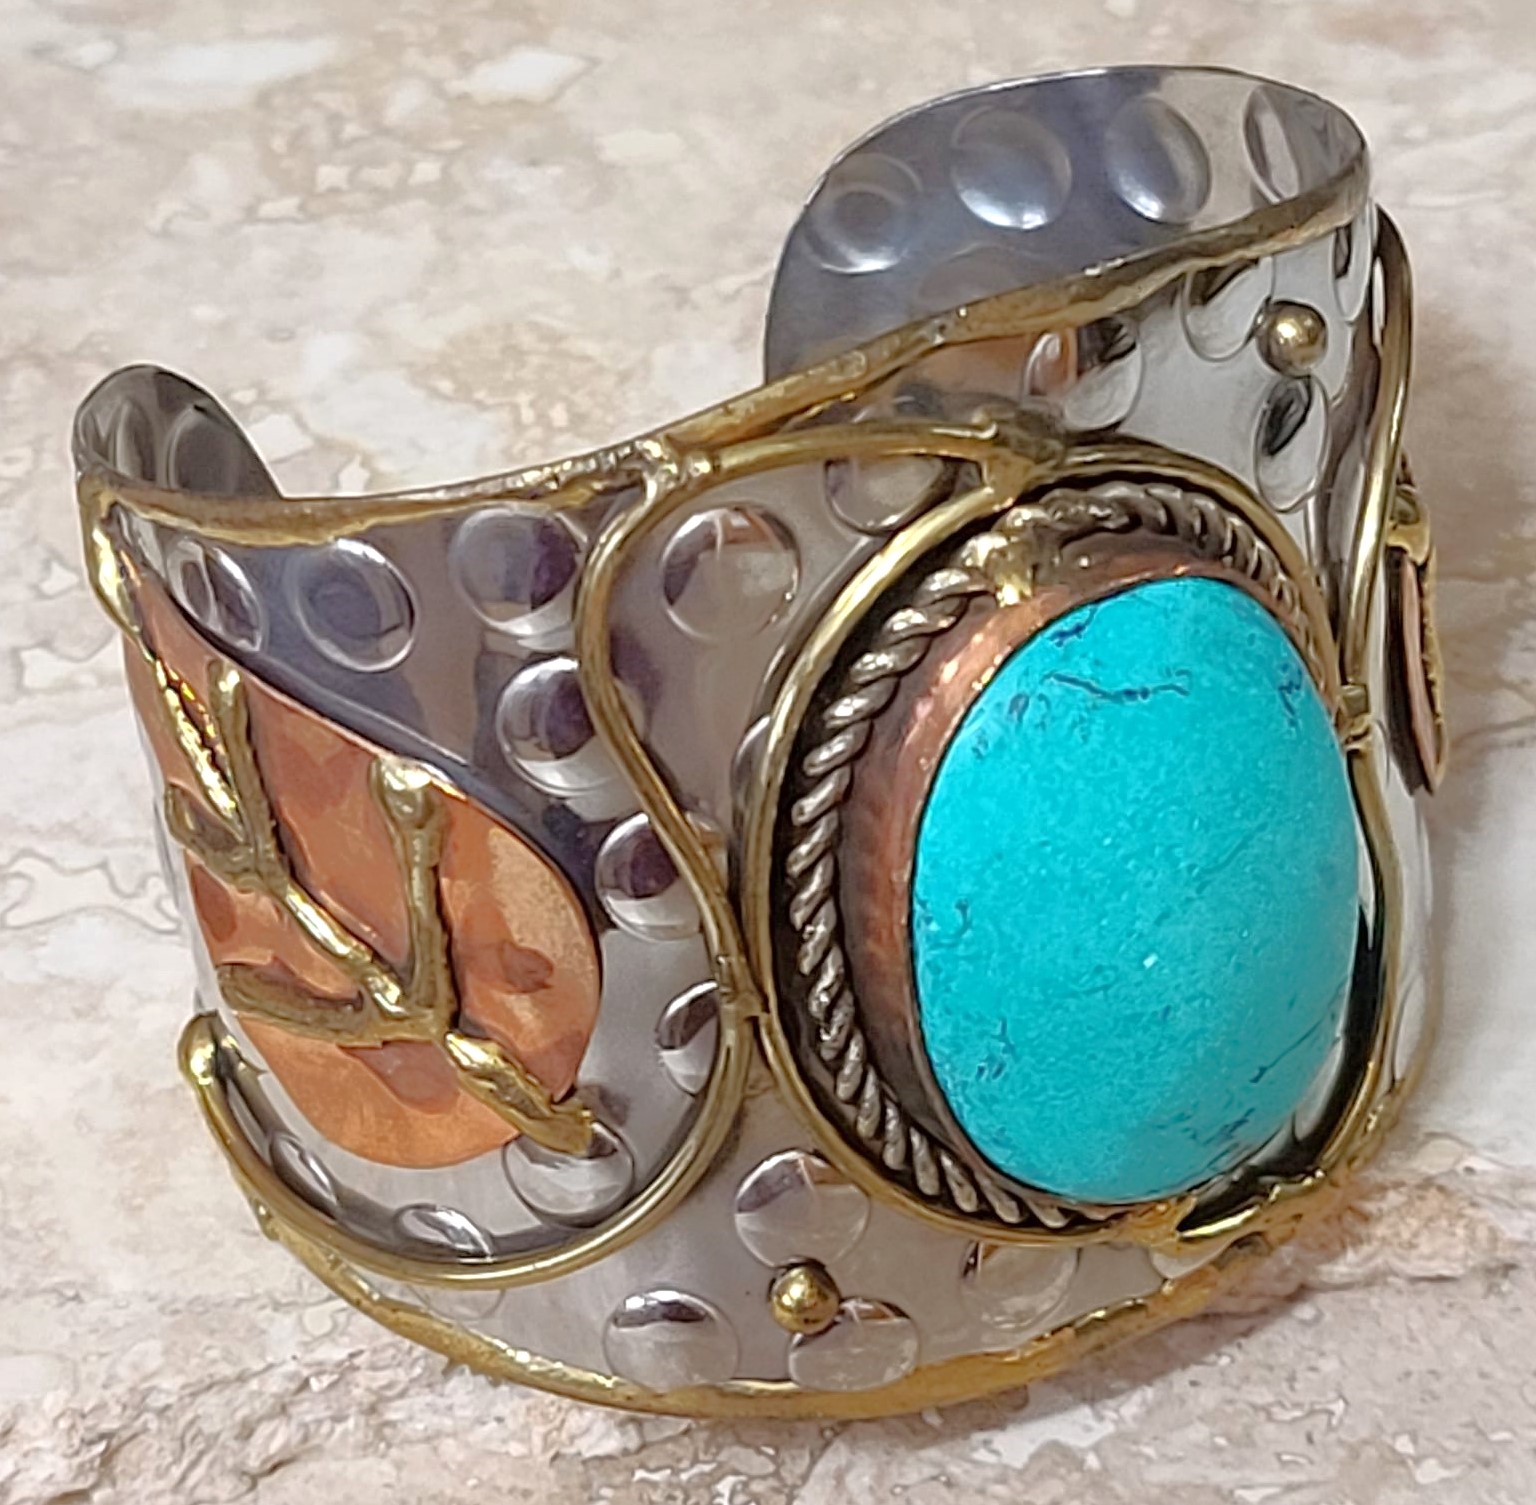 Cuff bracelet, with center howlite gemstone, tri color metals, copper, silver and brass